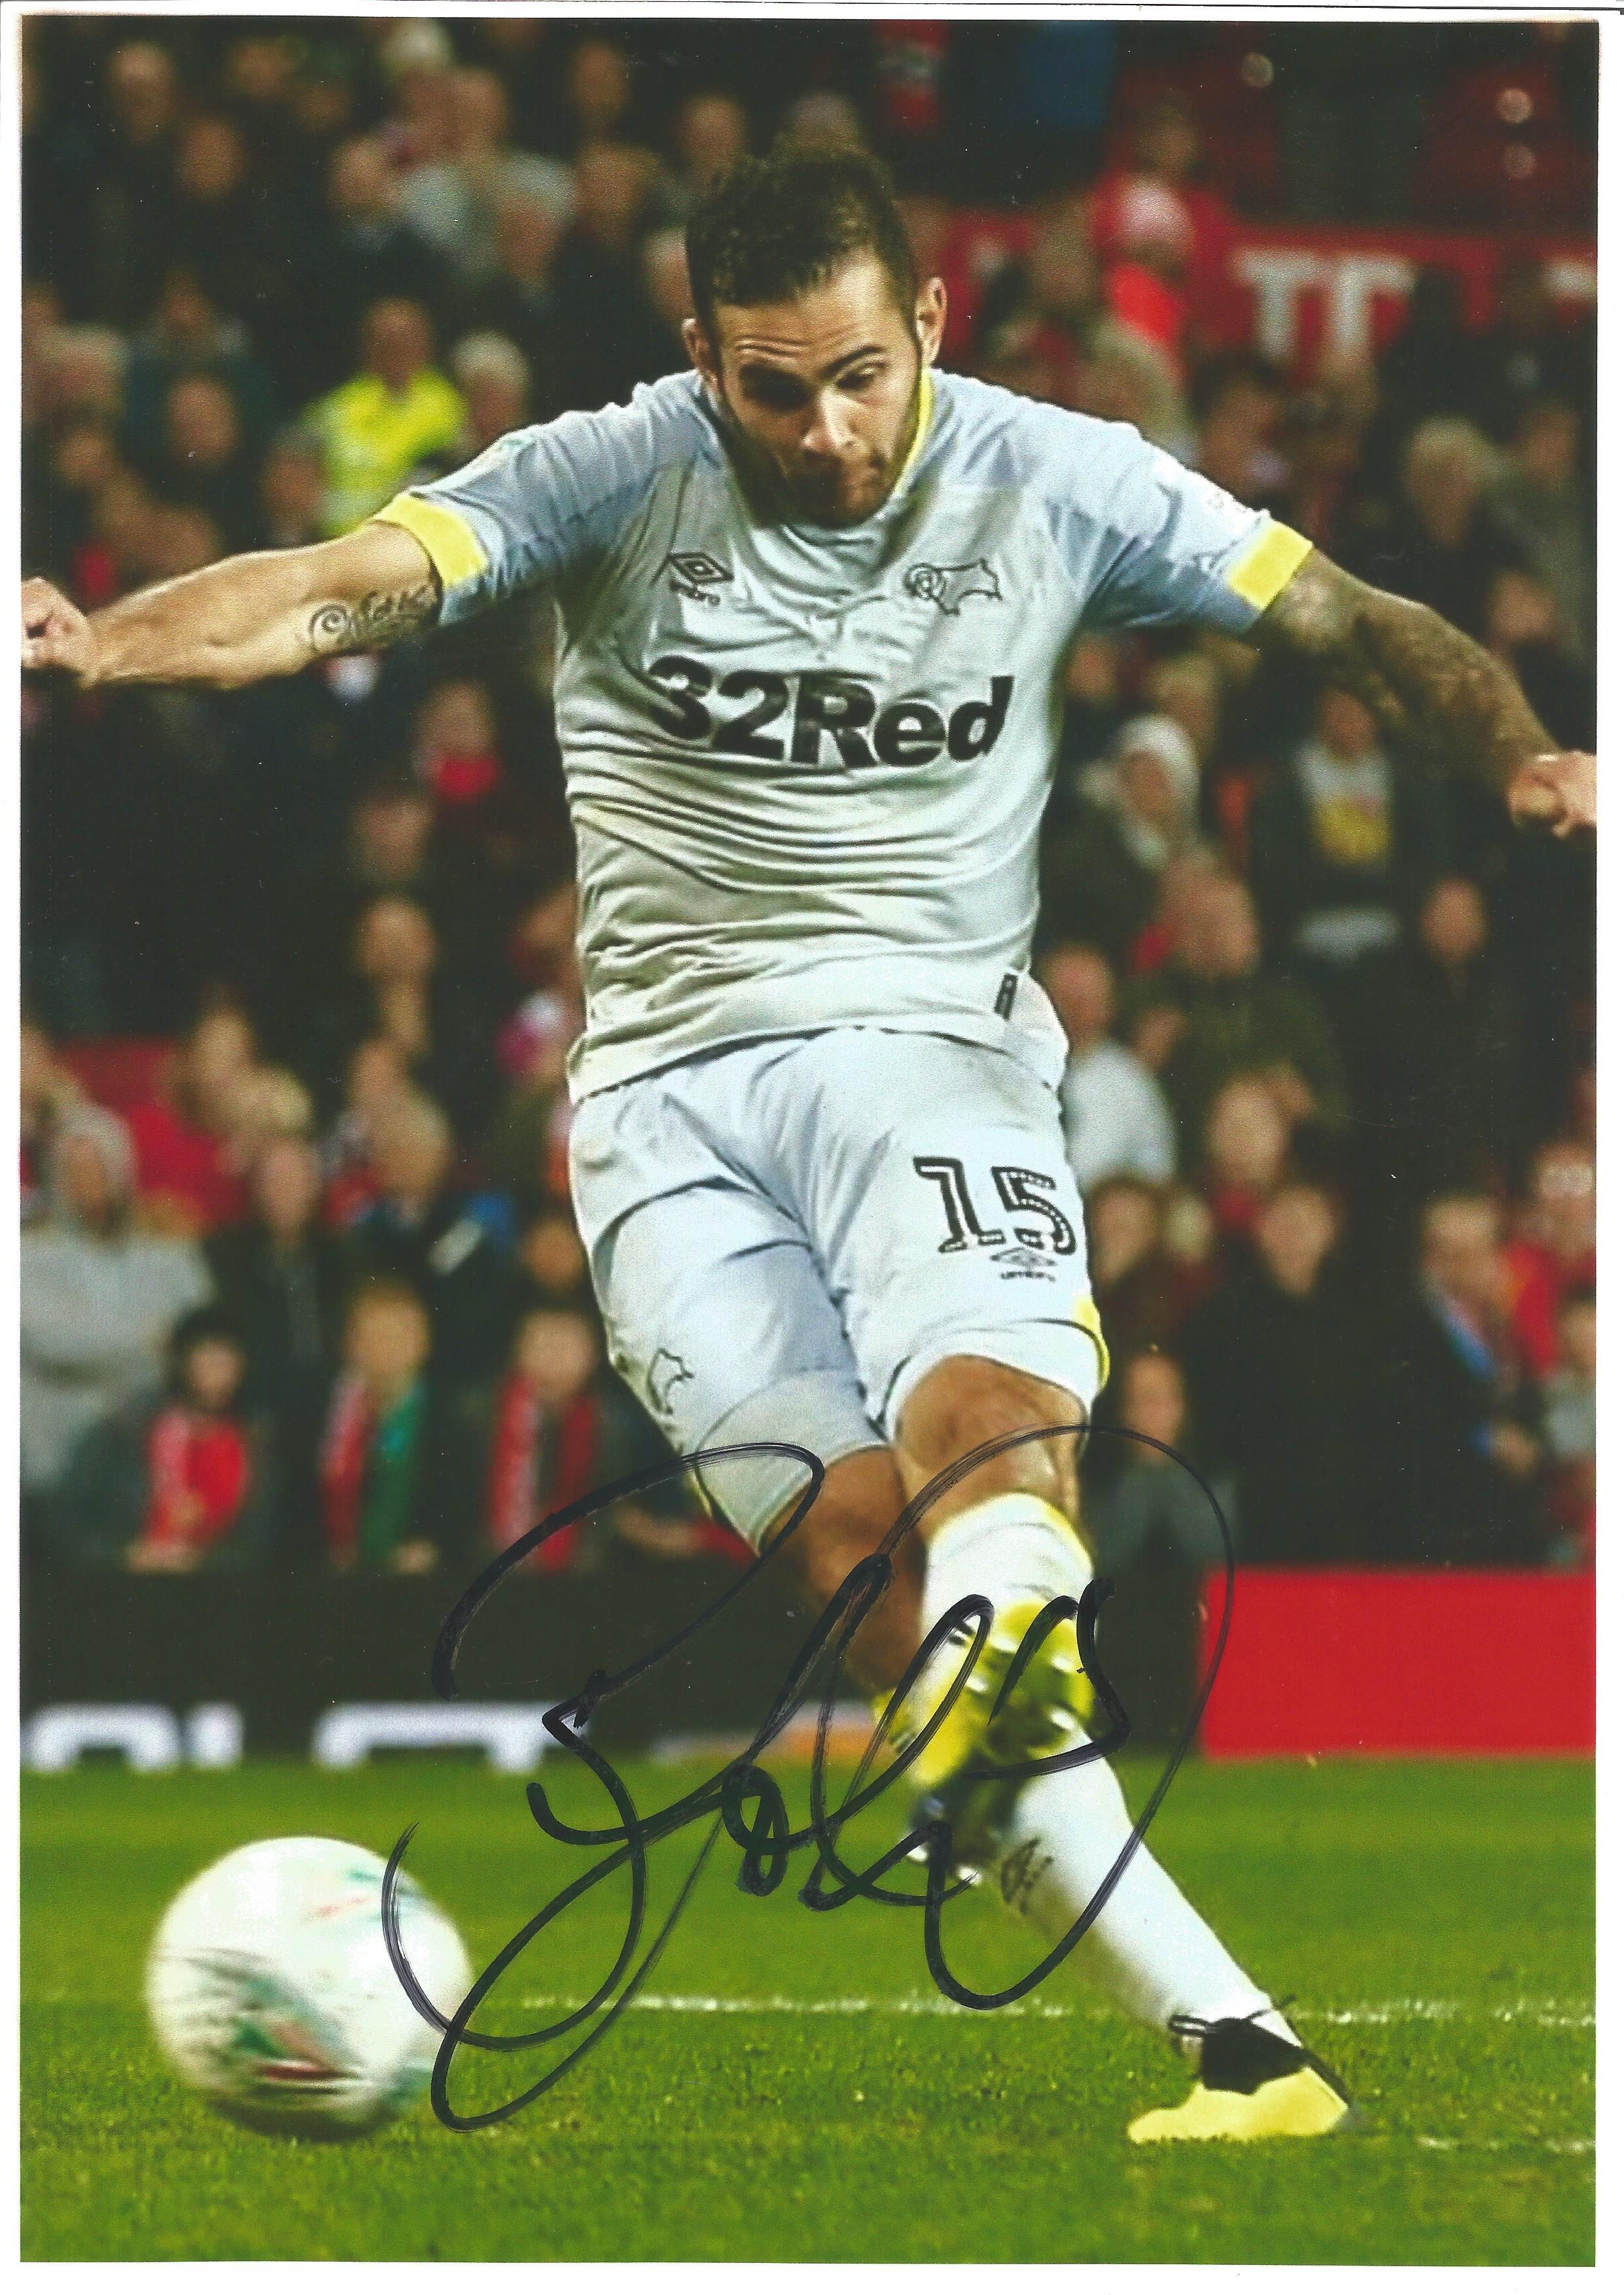 Football. Derby County Fc Collection of 7 Signed 12x8 Colour Photos. Signatures include Duane Homes, - Image 4 of 6